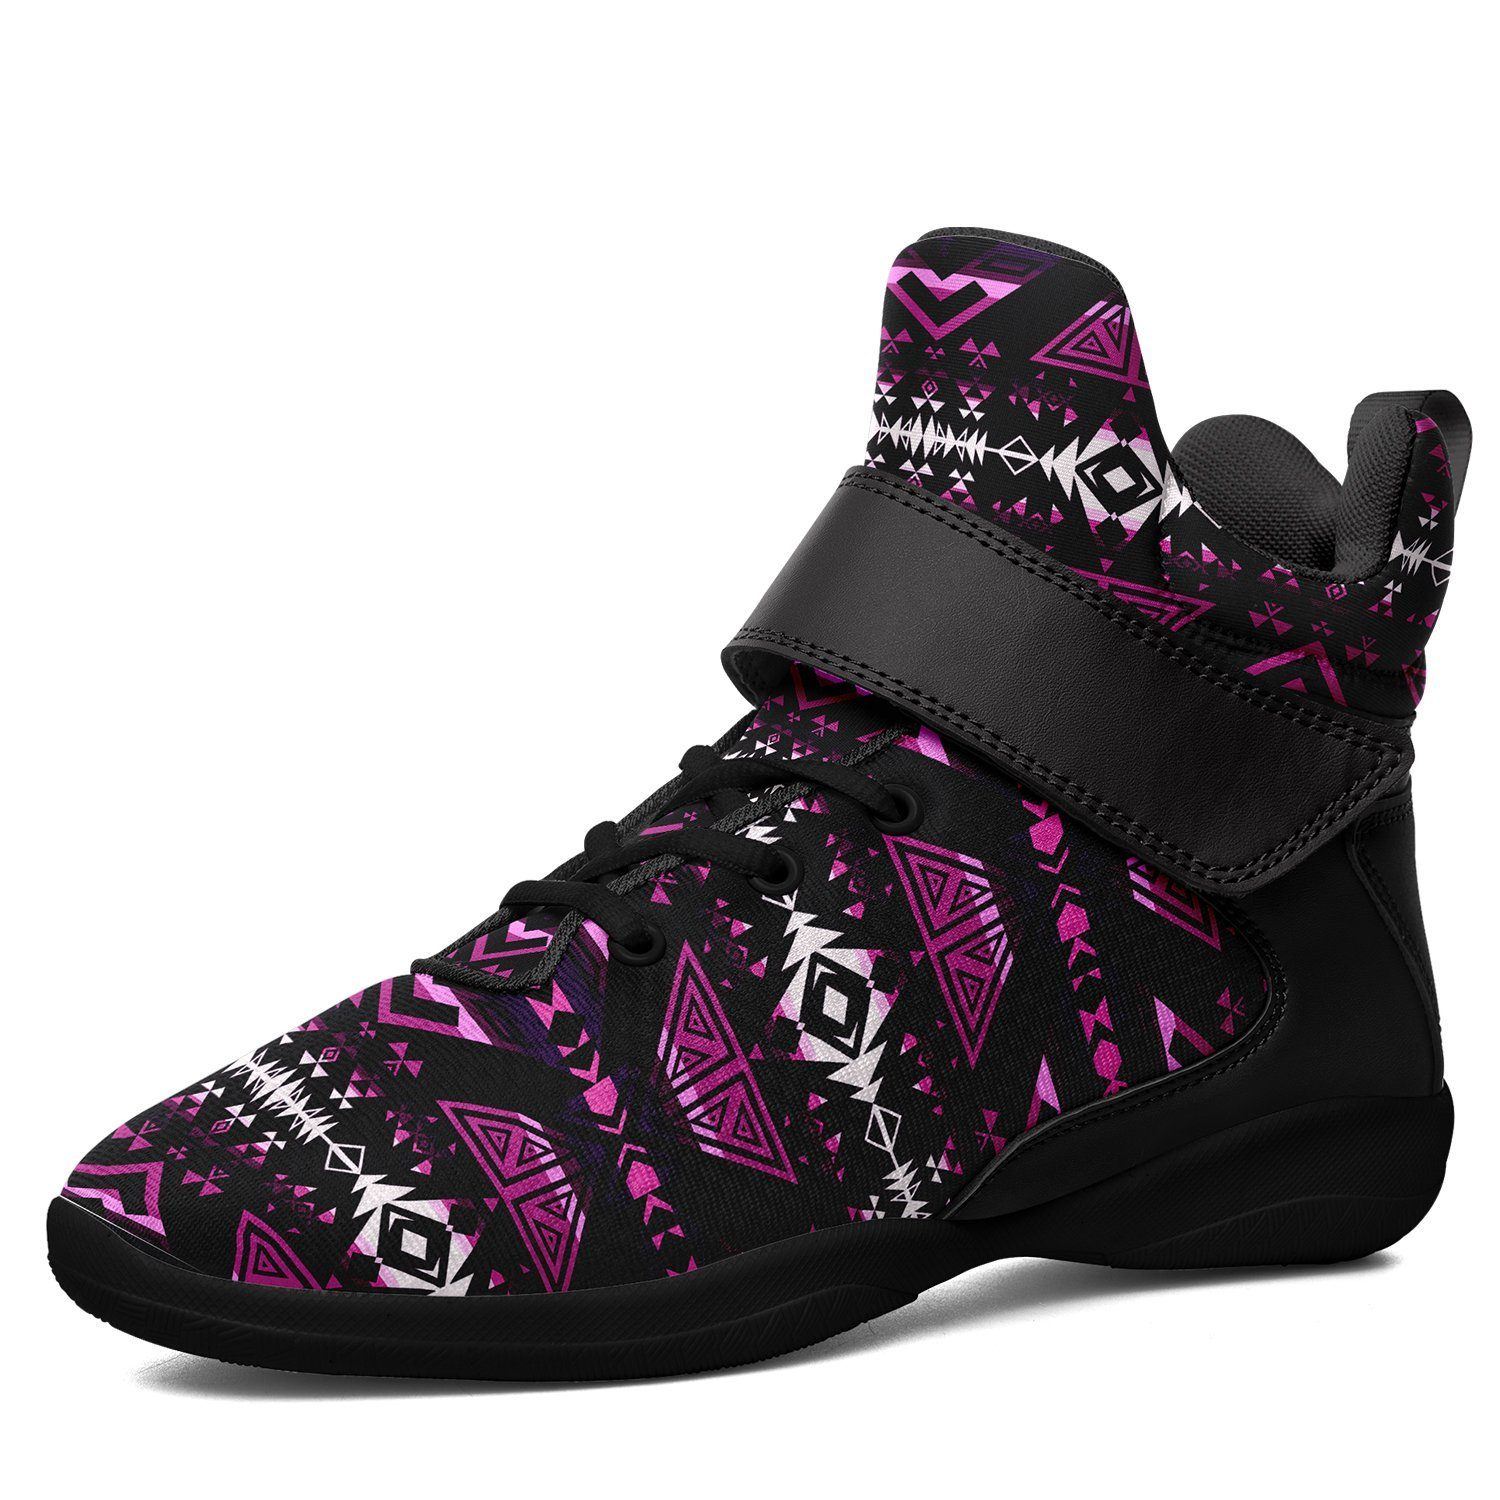 Upstream Expedition Moonlight Shadows Ipottaa Basketball / Sport High Top Shoes - Black Sole 49 Dzine US Men 7 / EUR 40 Black Sole with Black Strap 